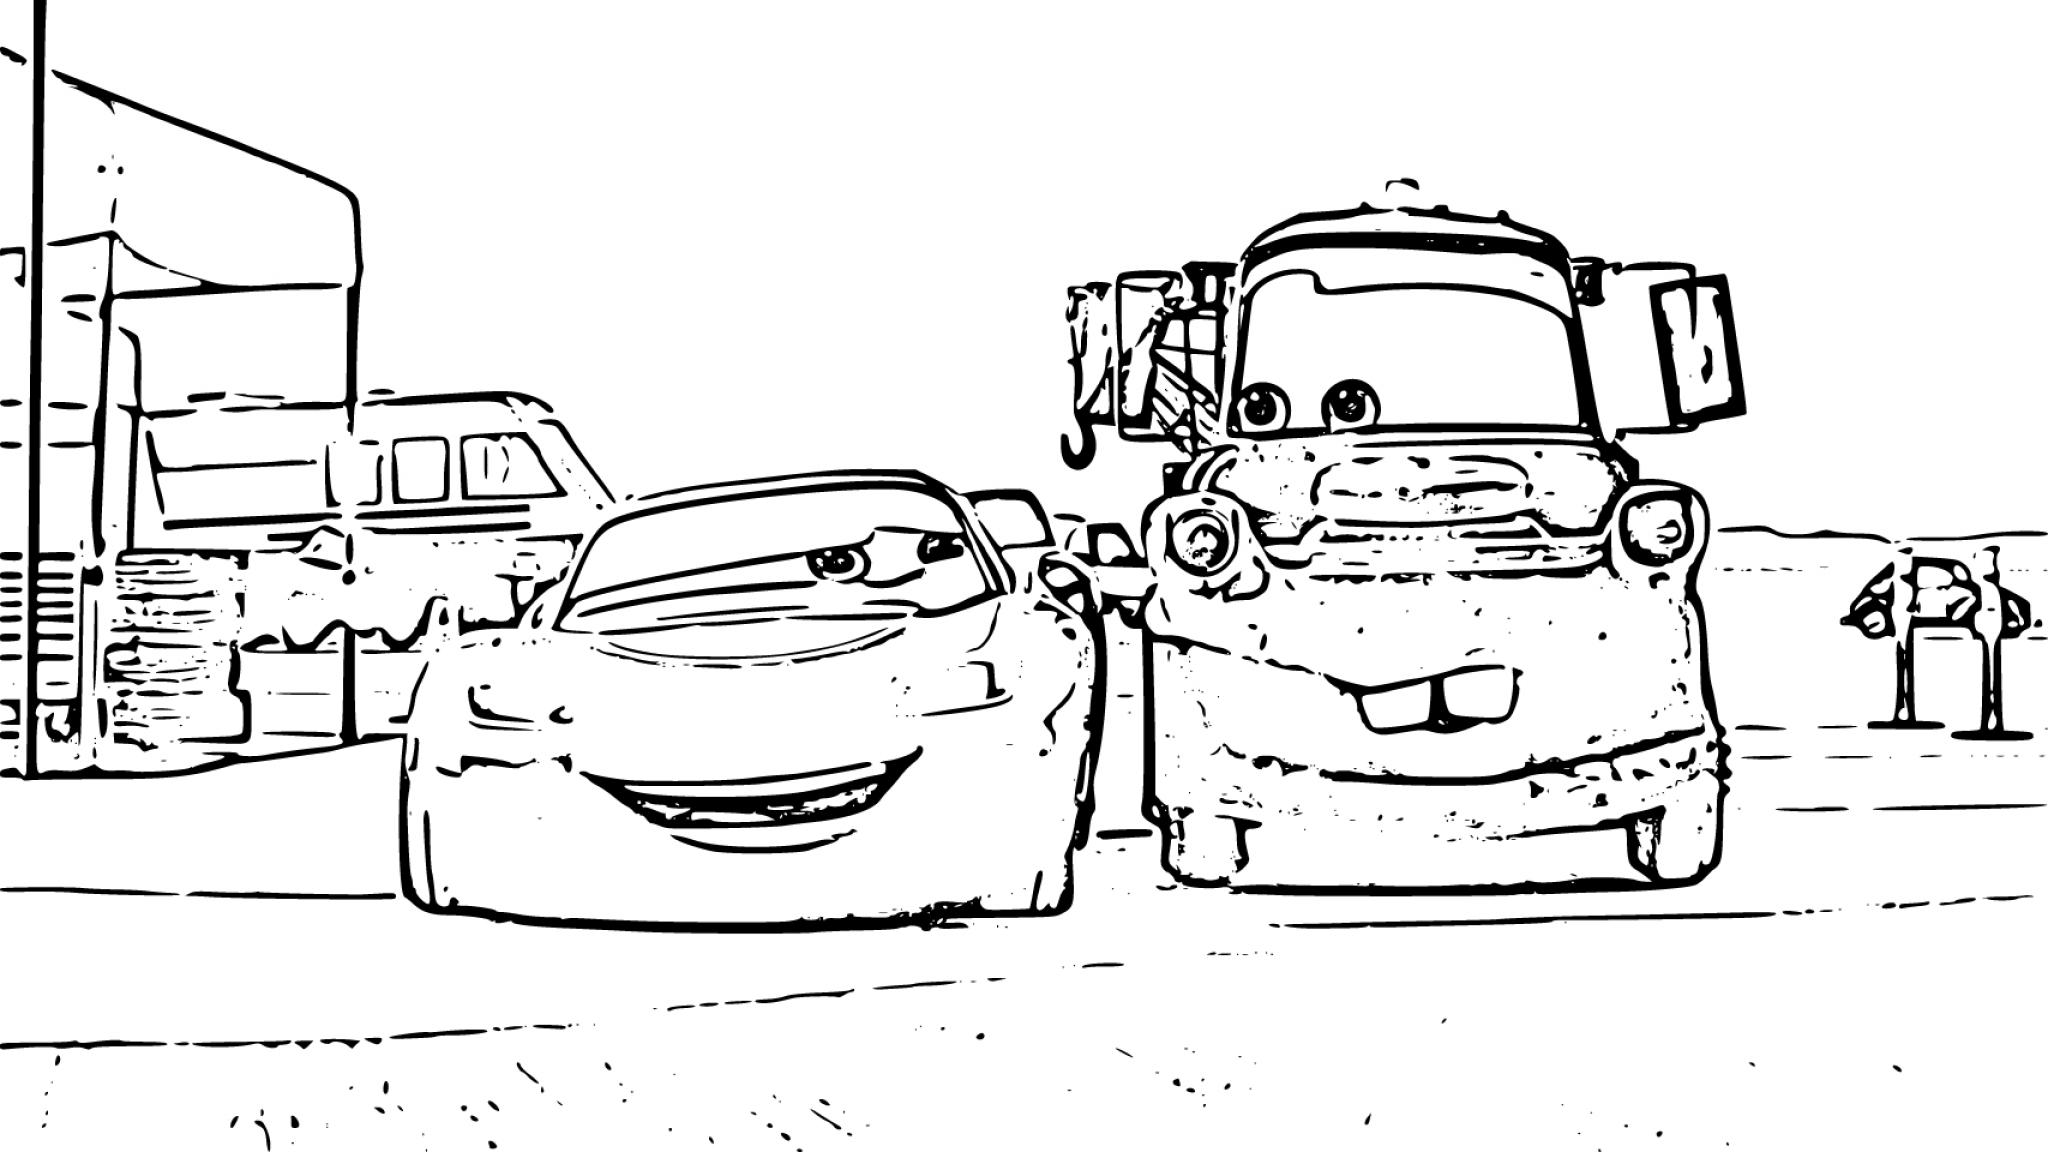 Cars on the Road: Mater and McQueen Coloring Pages for Kids Printable - SheetalColor.com